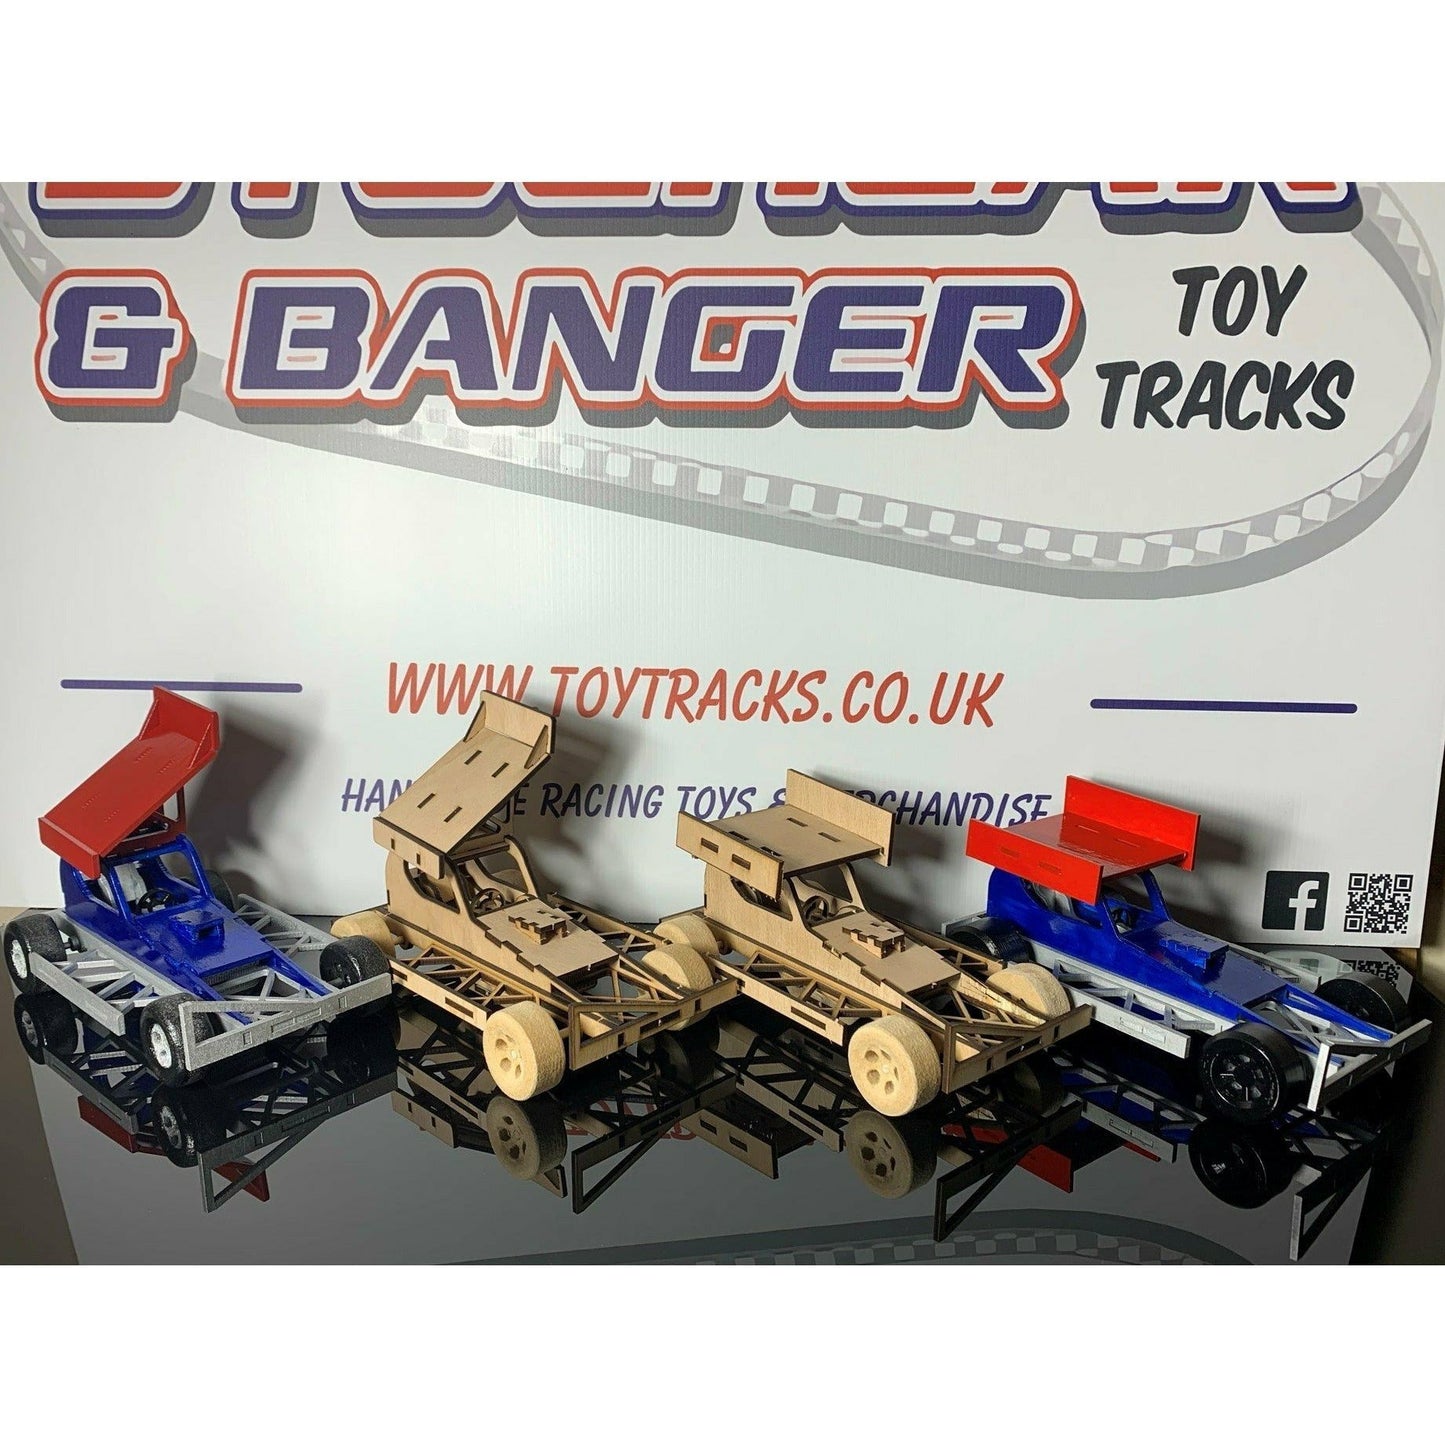 Build your own Stock Car | Brisca F1 - Tarmac & Shale Wing - Build Your Own - Stock Car & Banger Toy Tracks